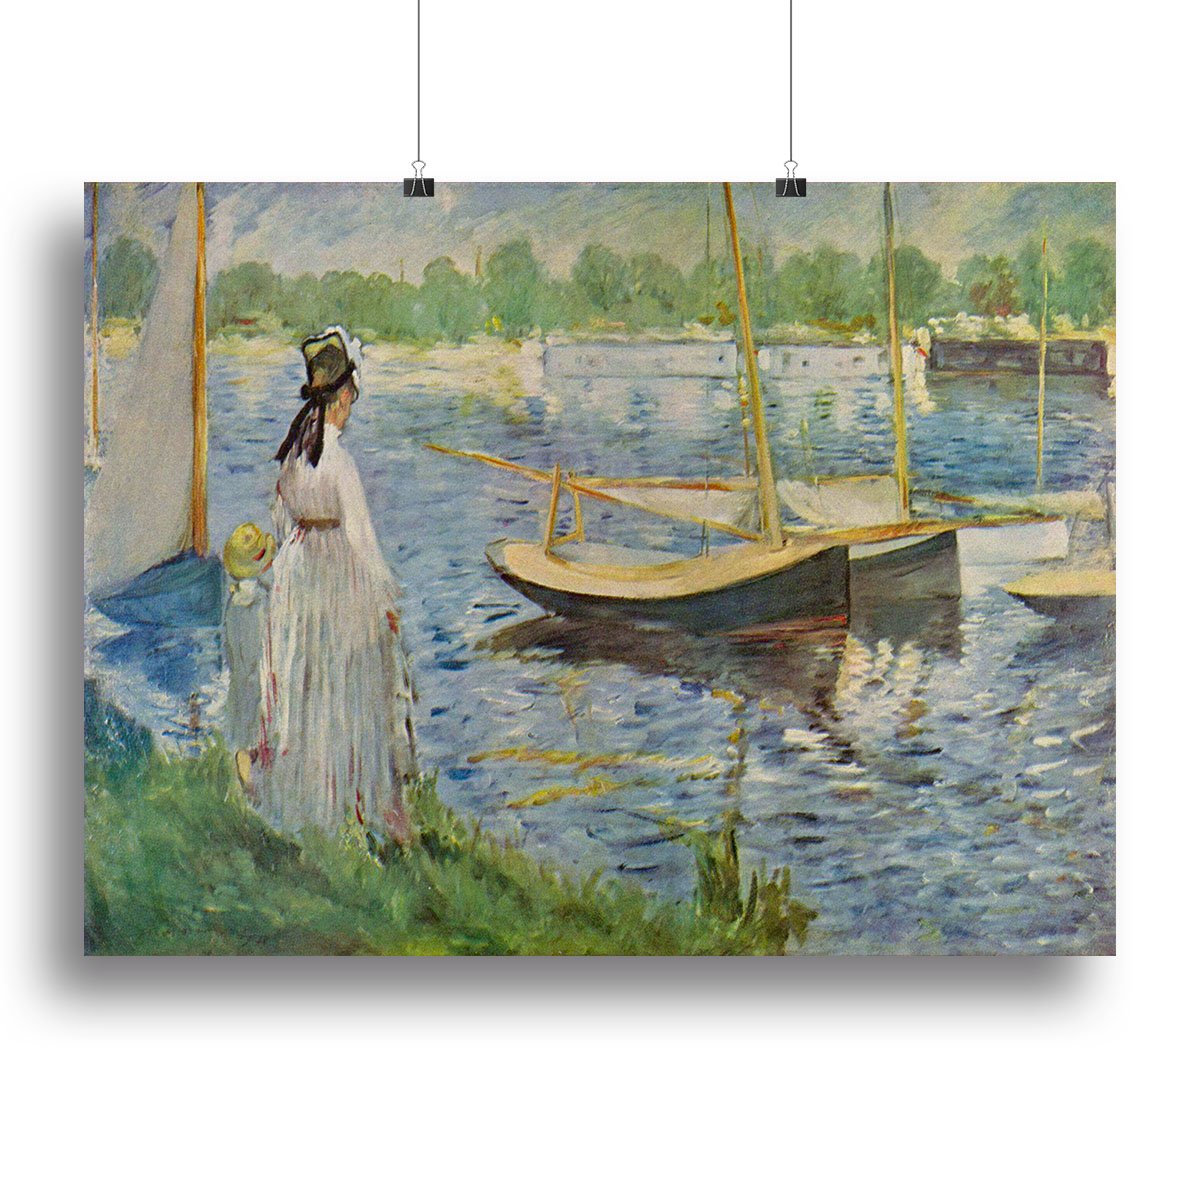 His embankment at Argenteuil by Manet Canvas Print or Poster